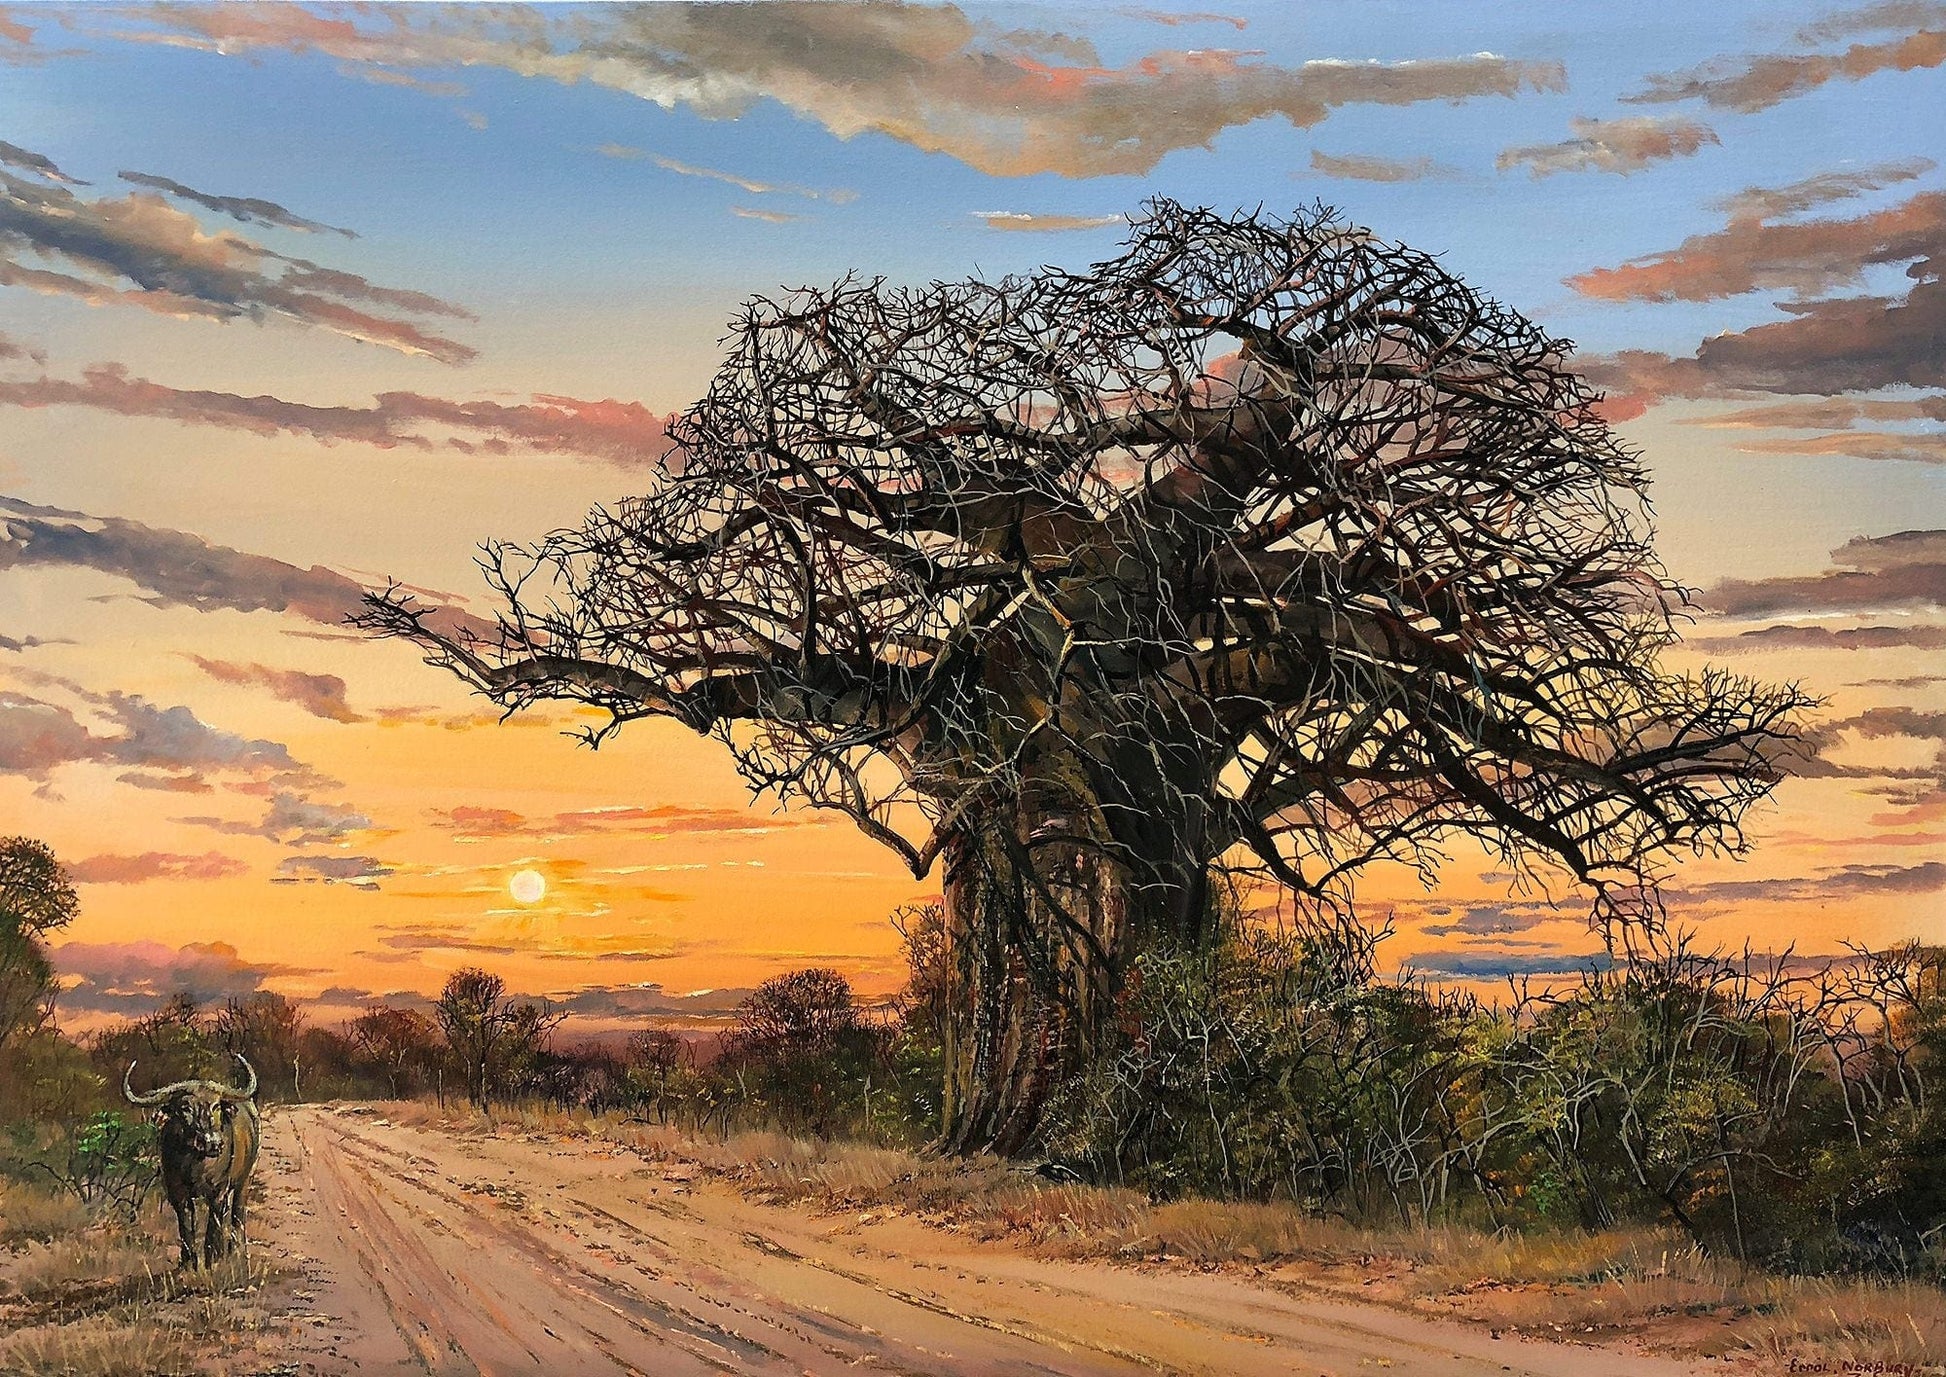 Original oil on canvas painting by artist Errol Norbury of old baobab tree with buffalo at sunset.